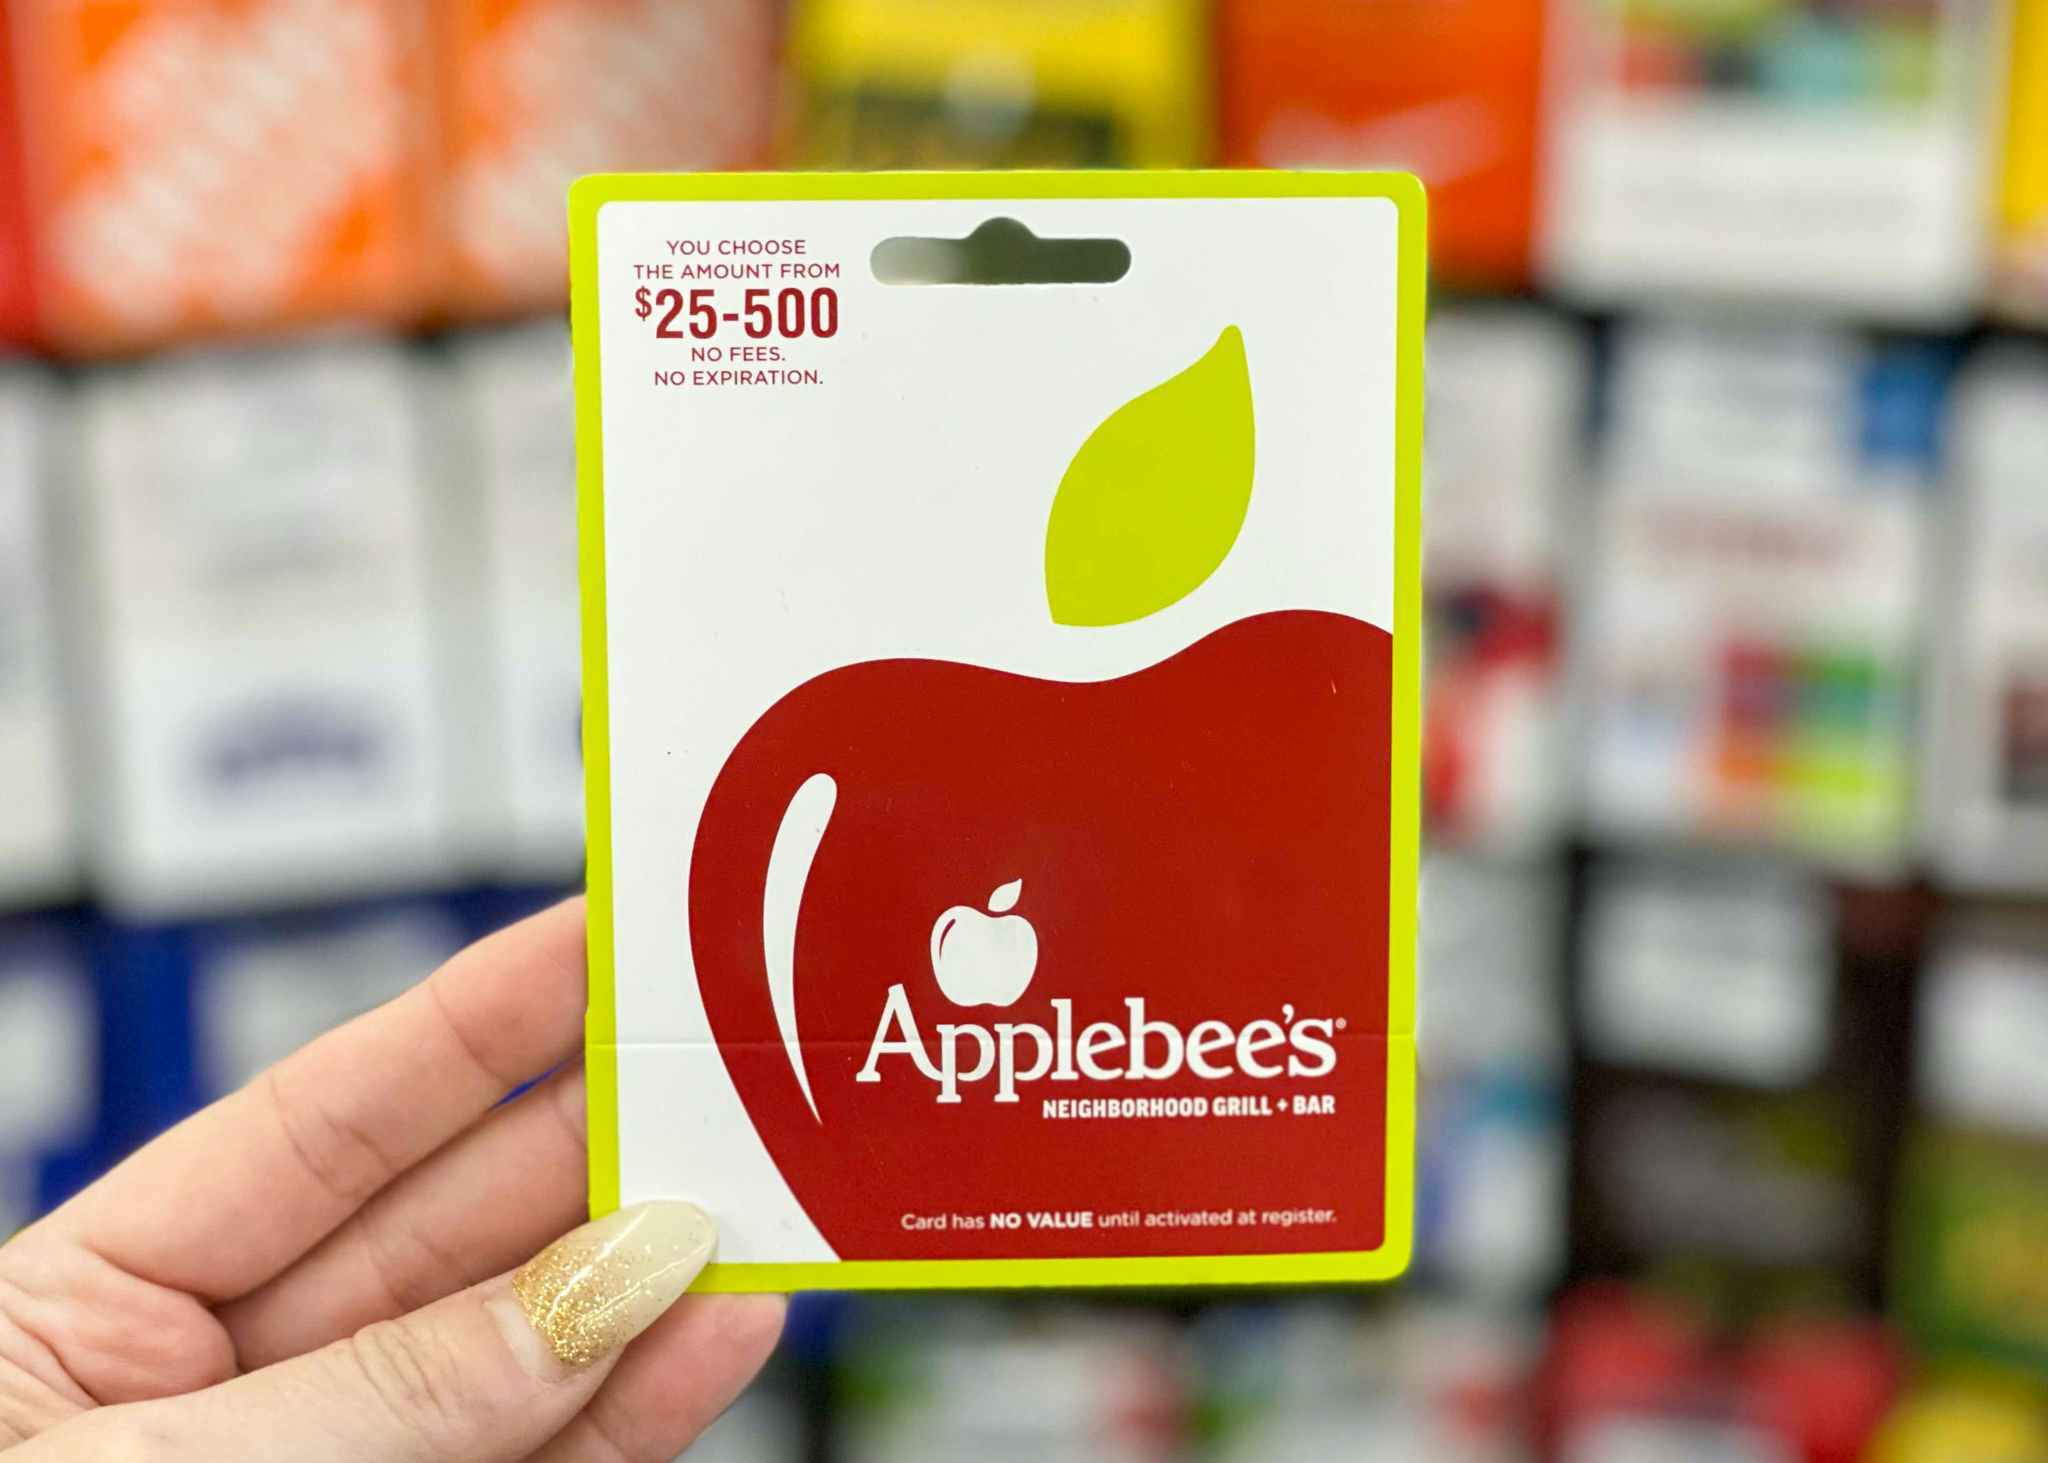 woman holding up an applebee's gift card for $25-$500